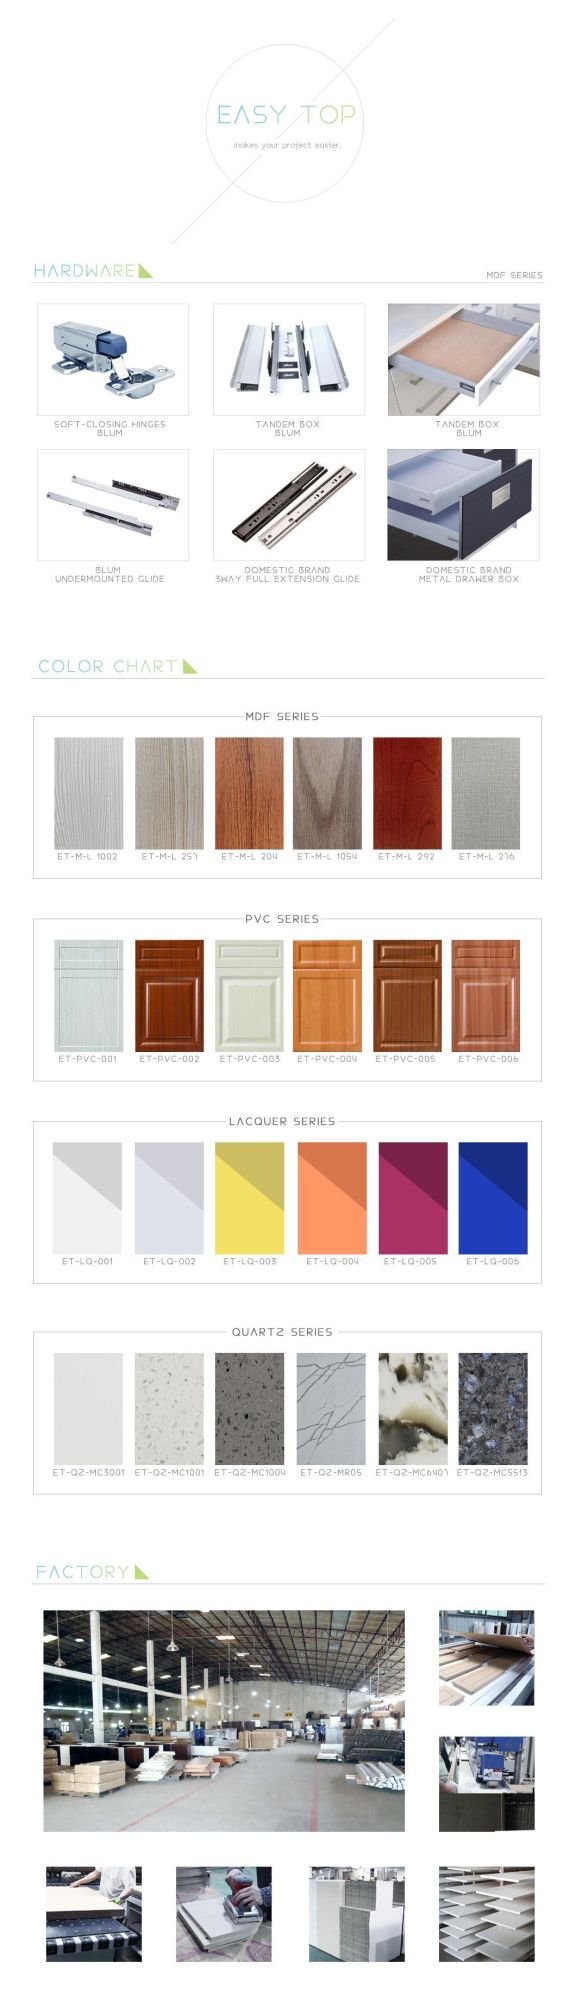 L-Shaped Wooden Double Swing Door Scratch-Resistant Melamine Finish Modular Furniture Kitchen Cabinets